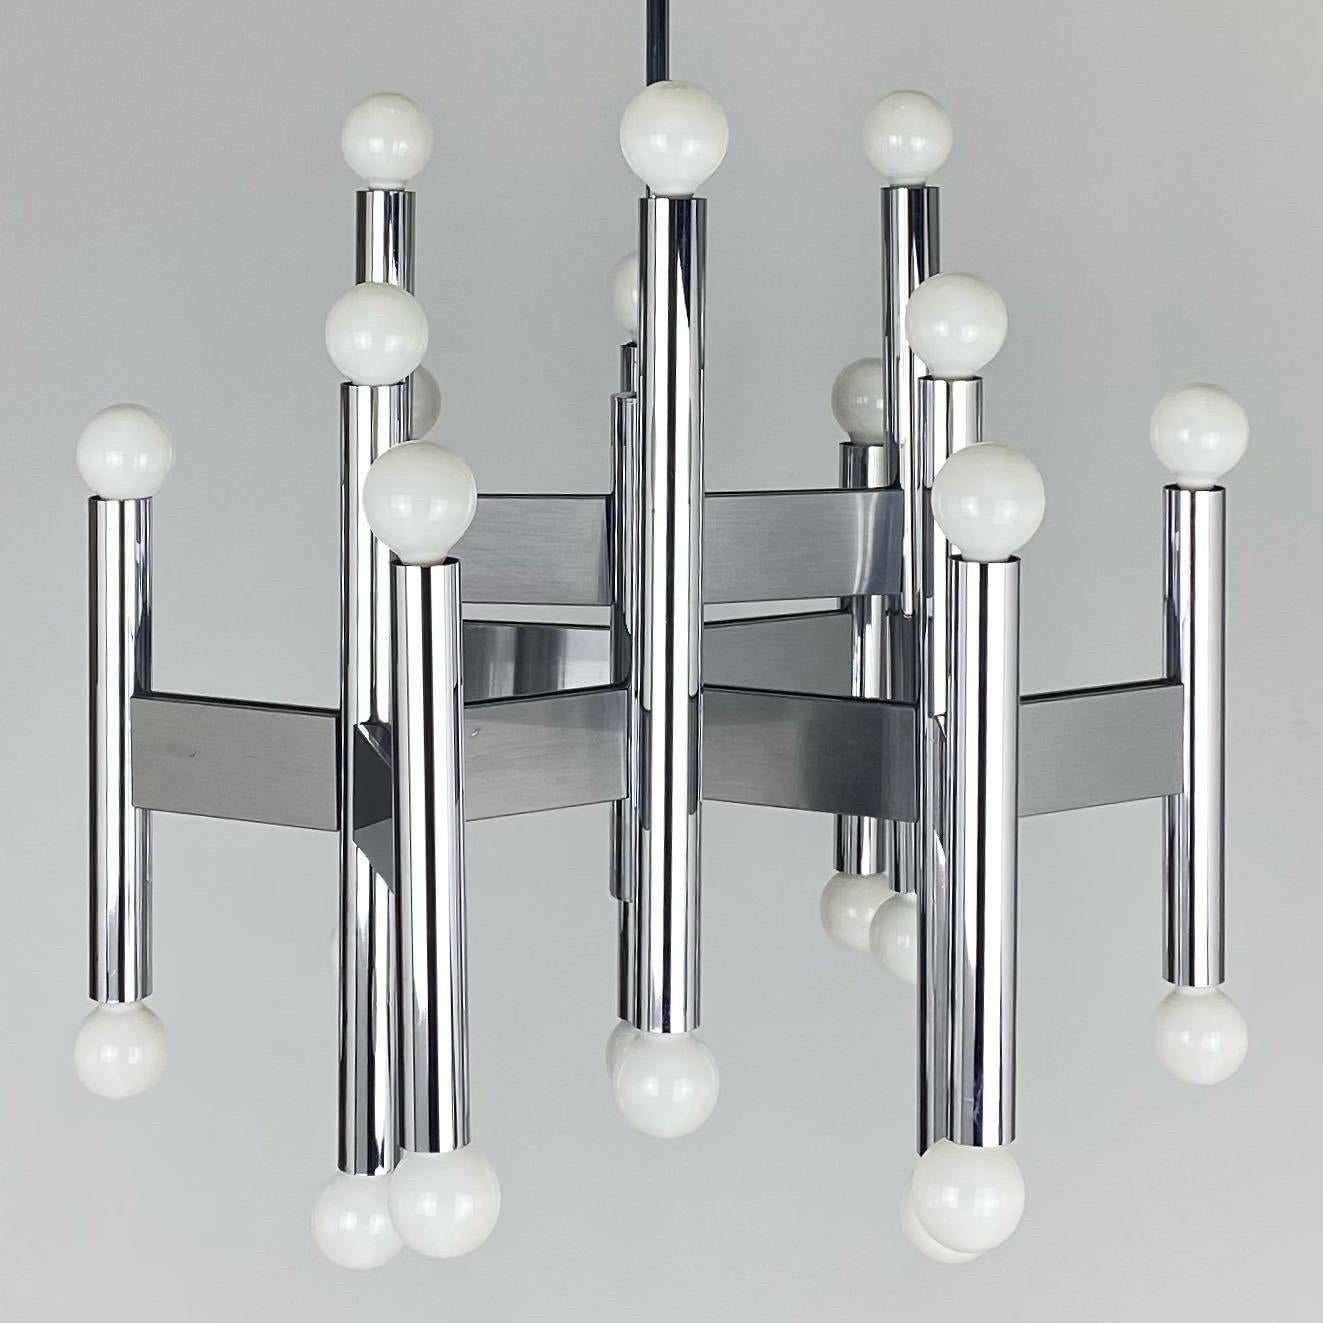 Late 20th Century Robert Sonneman 24 Bulb Chrome Chandelier In Good Condition For Sale In Westfield, NJ